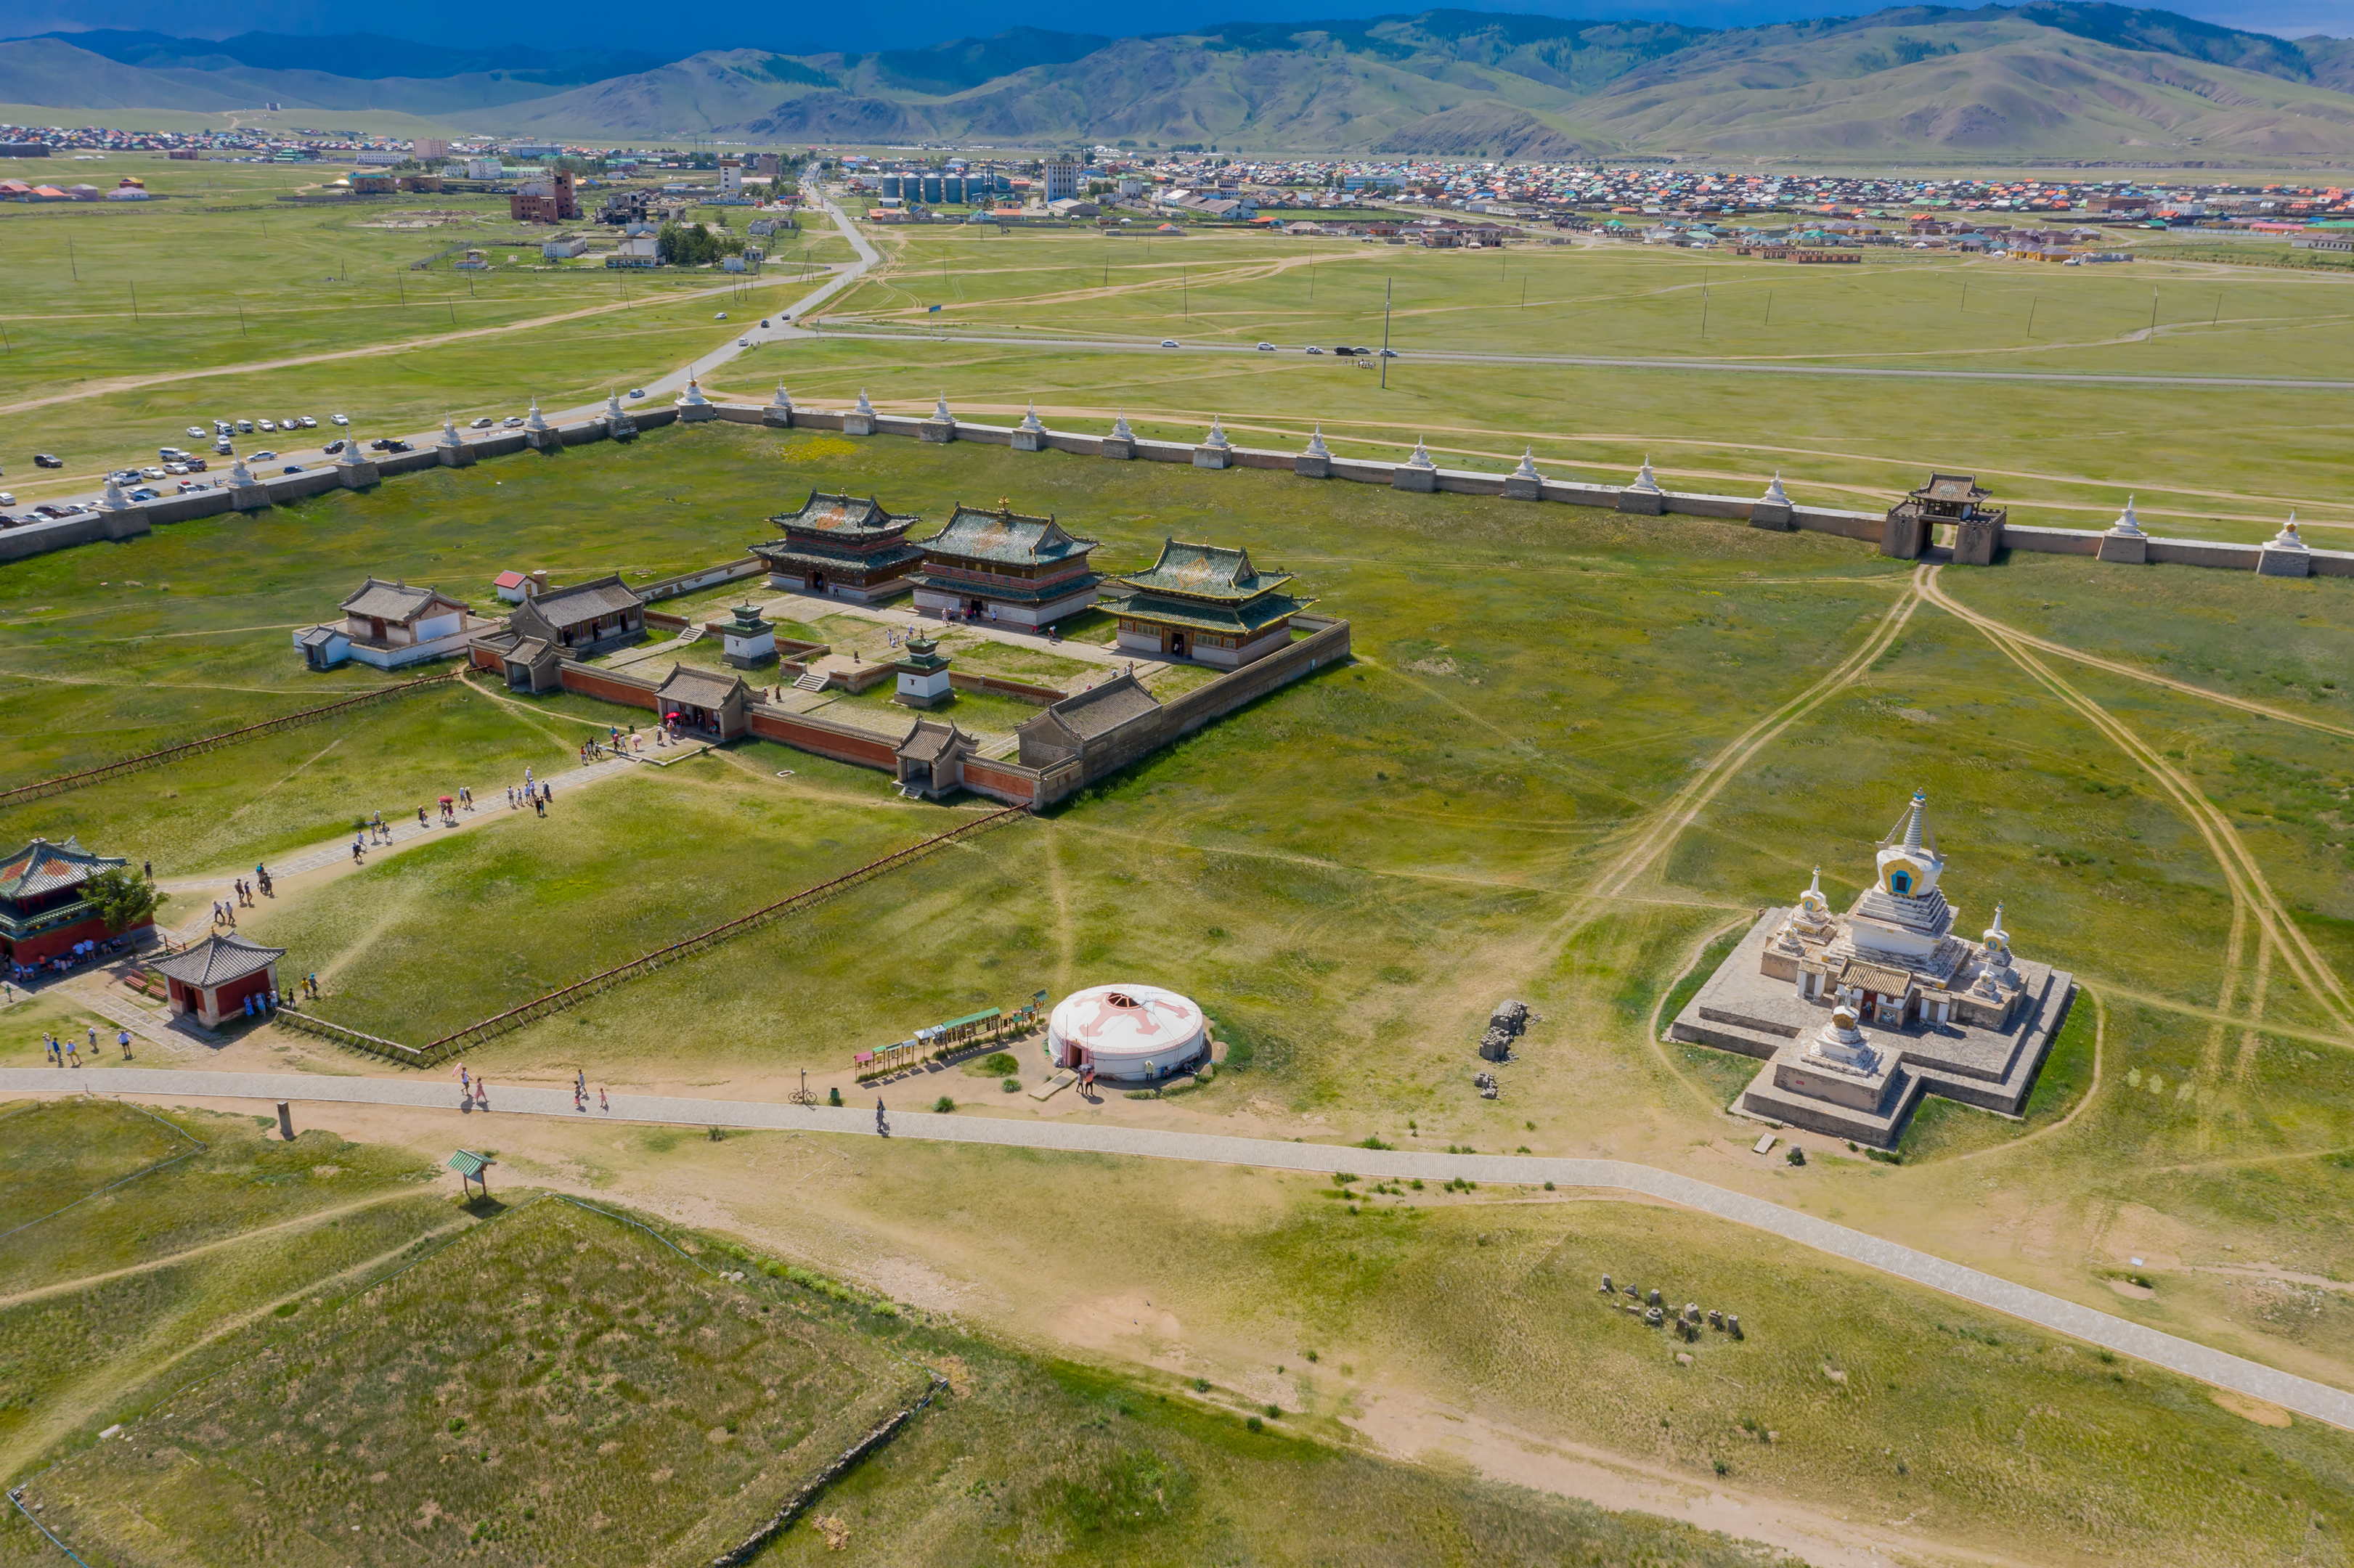 Aerial view of Karakorum, the capital of the Mongol Empire established by Genghis Khan